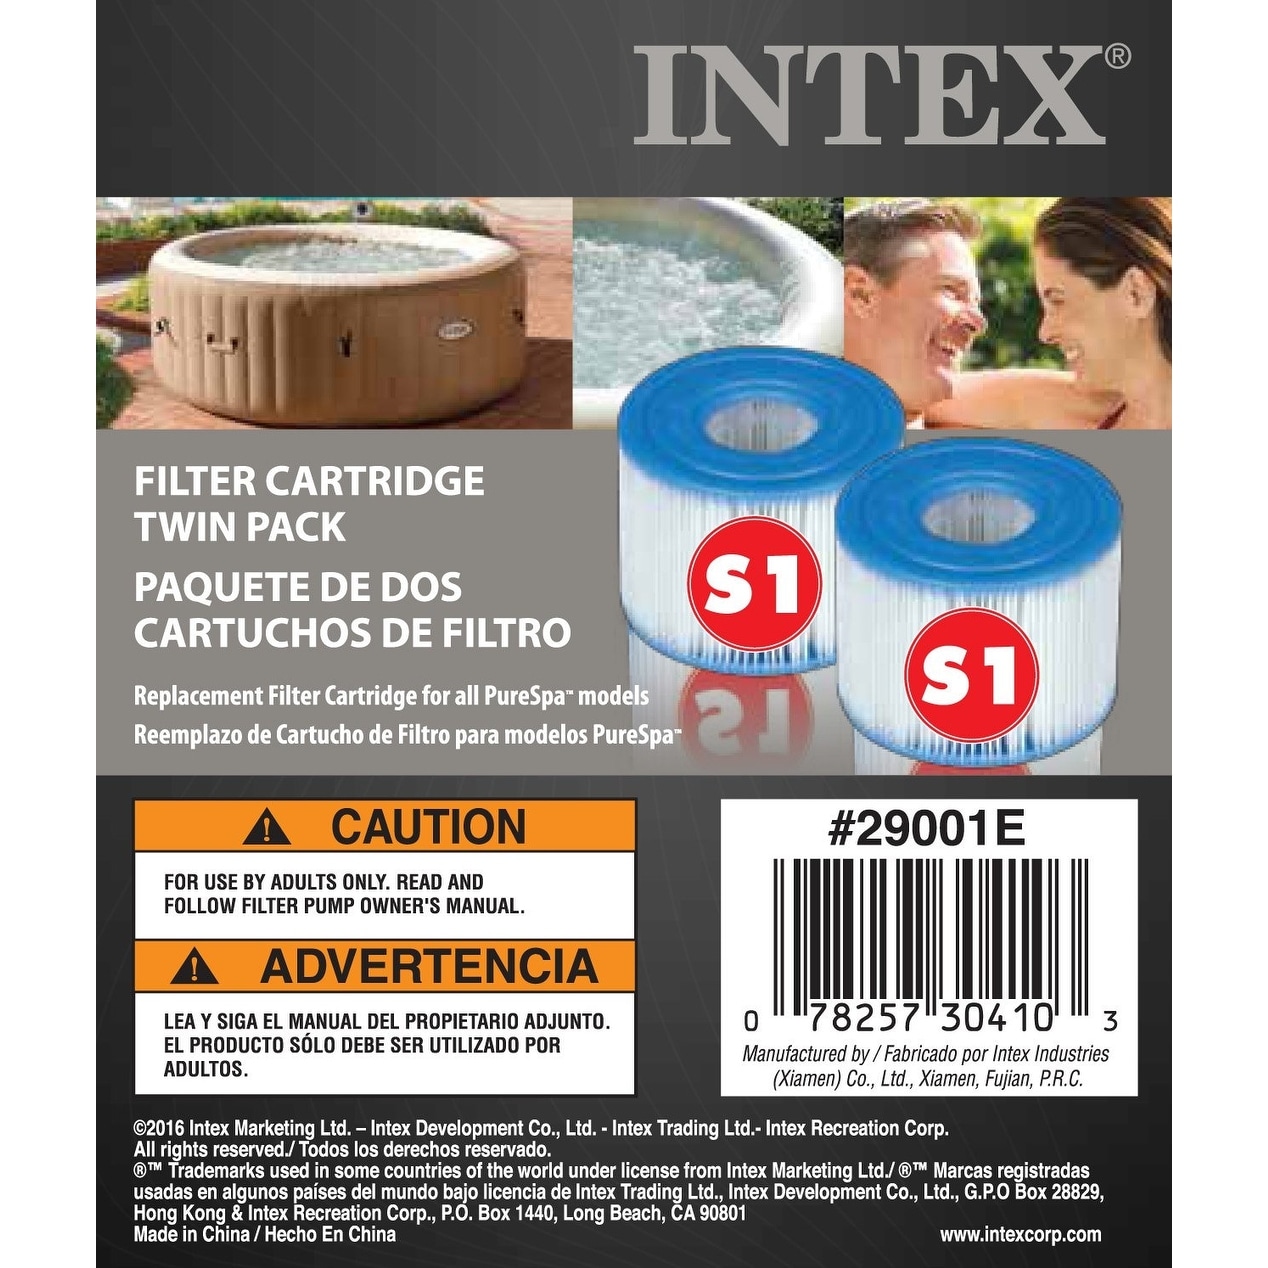 Intex Multi-Colored LED Spa Light and Cup Holder  Type S1 Pool Filters (6  Pack) Bed Bath  Beyond 35761103